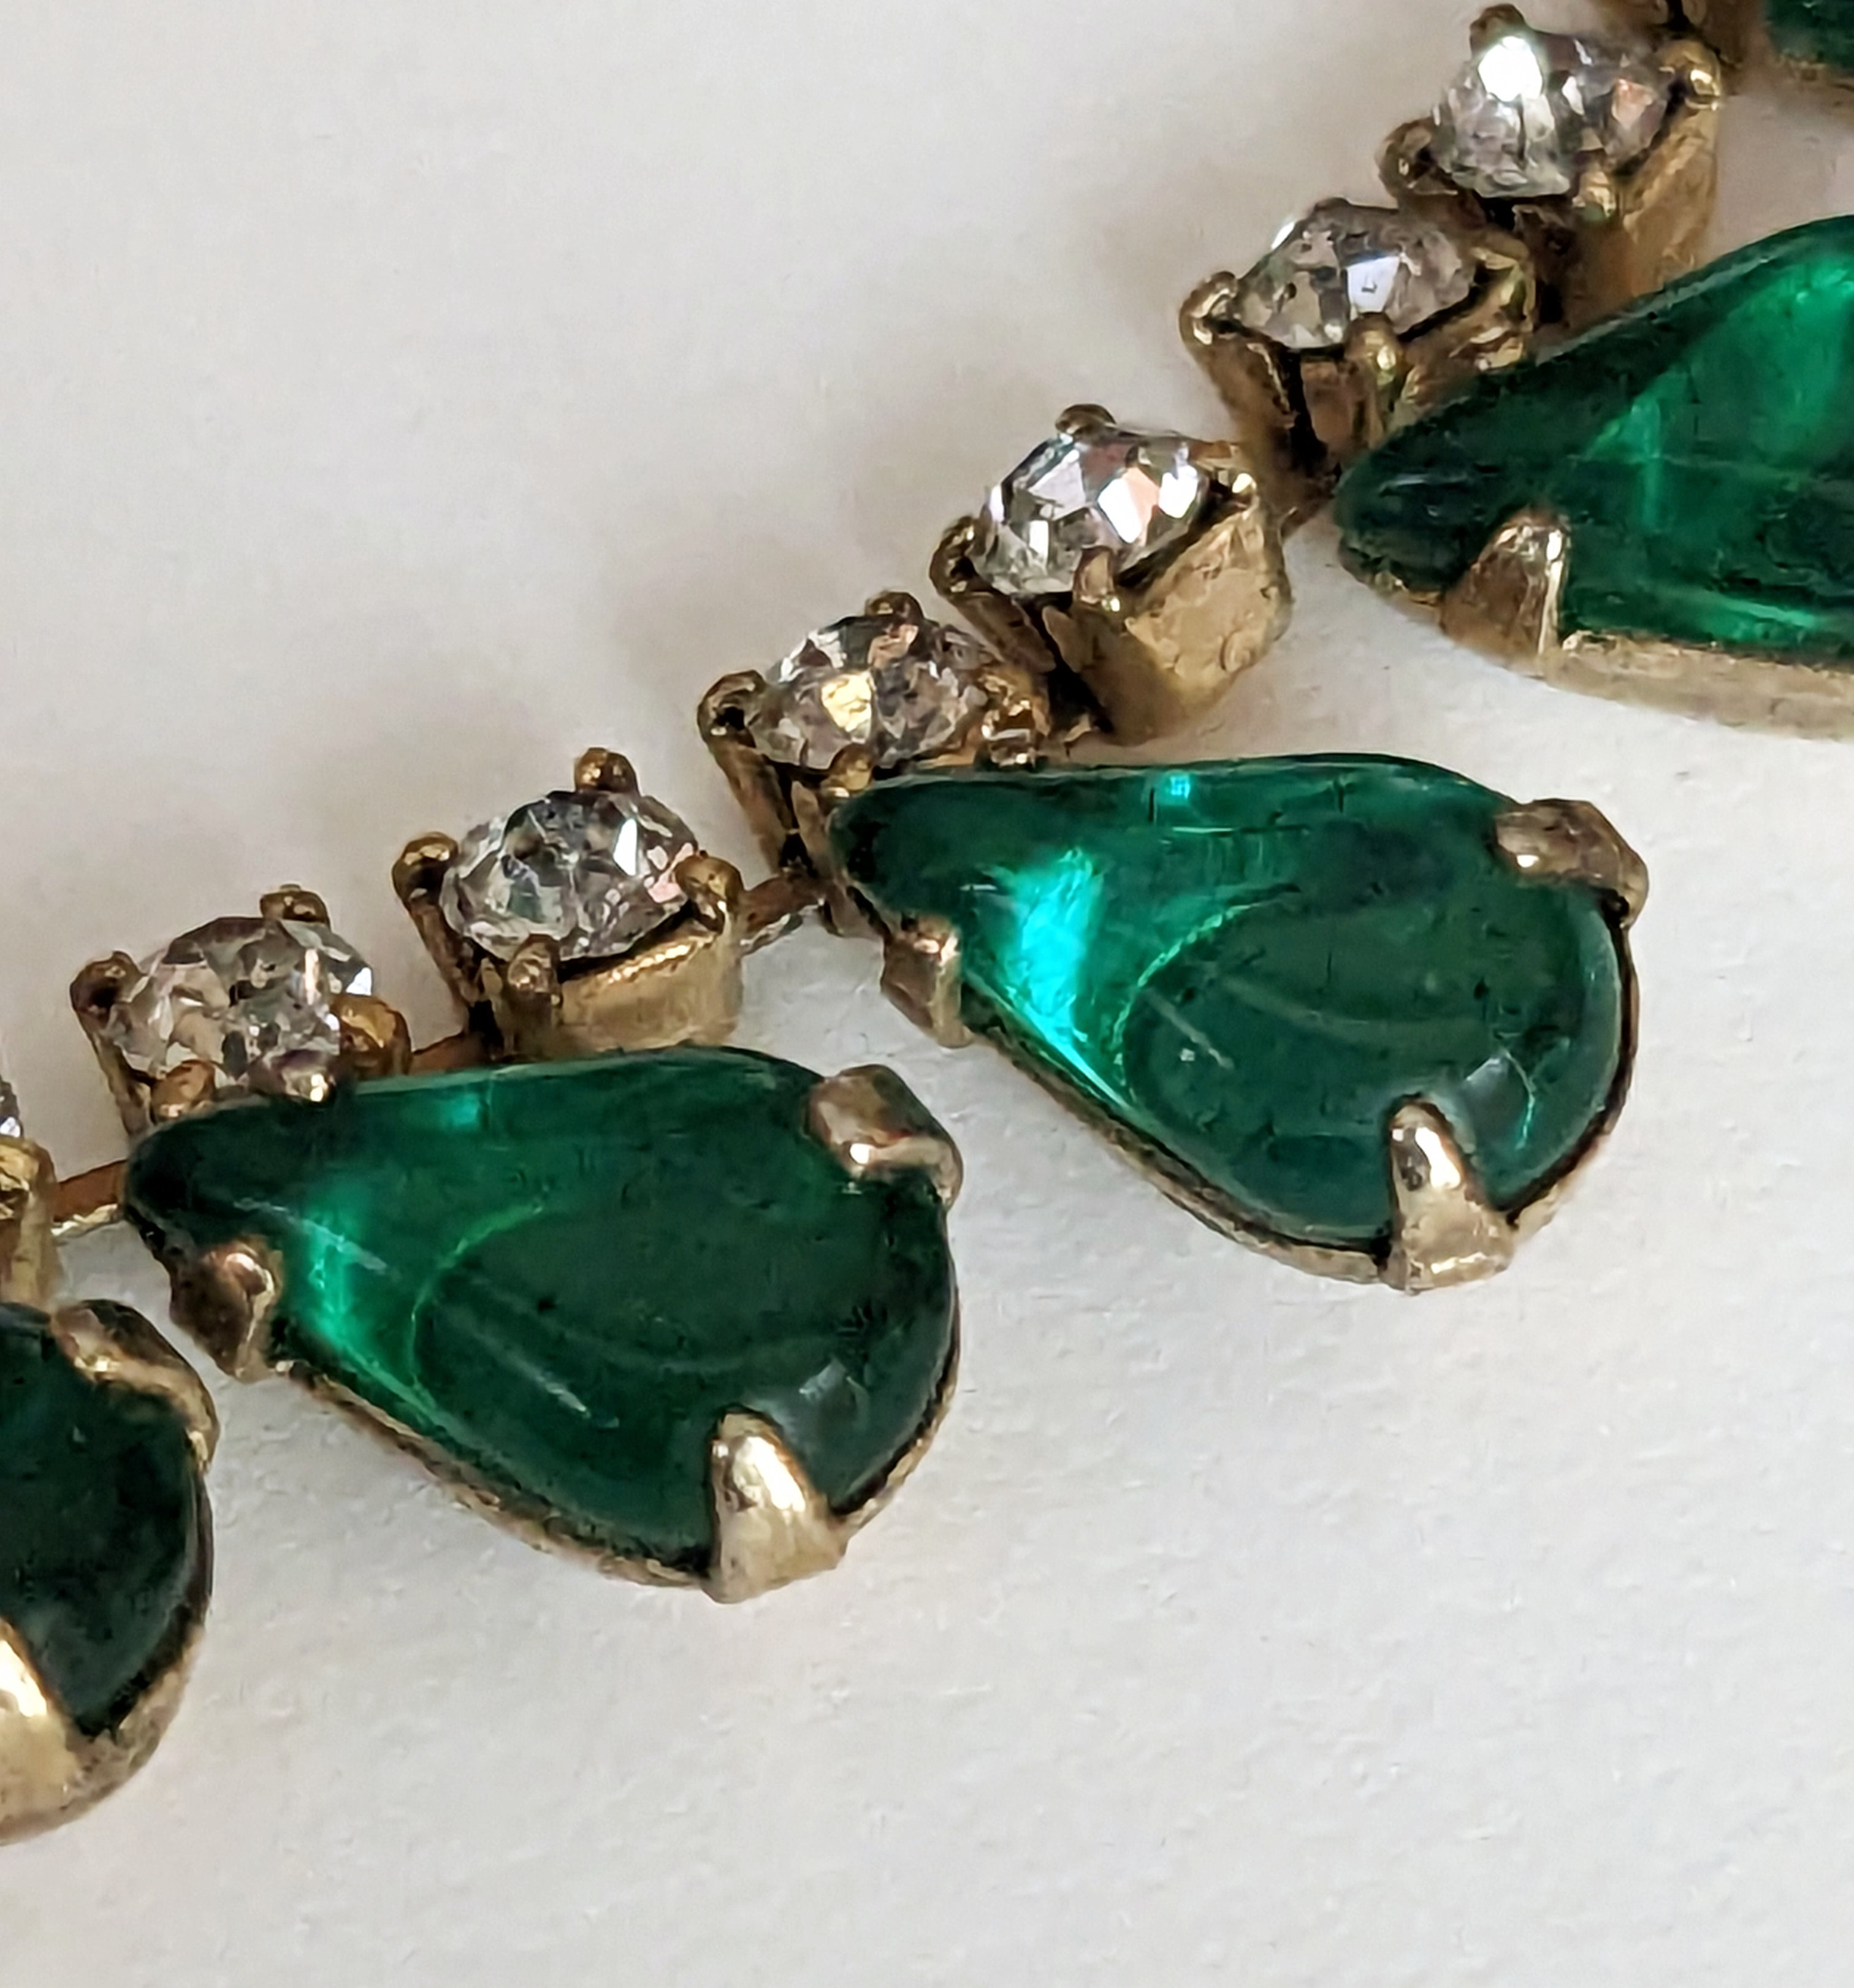 How to Describe This Vintage Green Glass Teardrops Necklace | Antiques ...